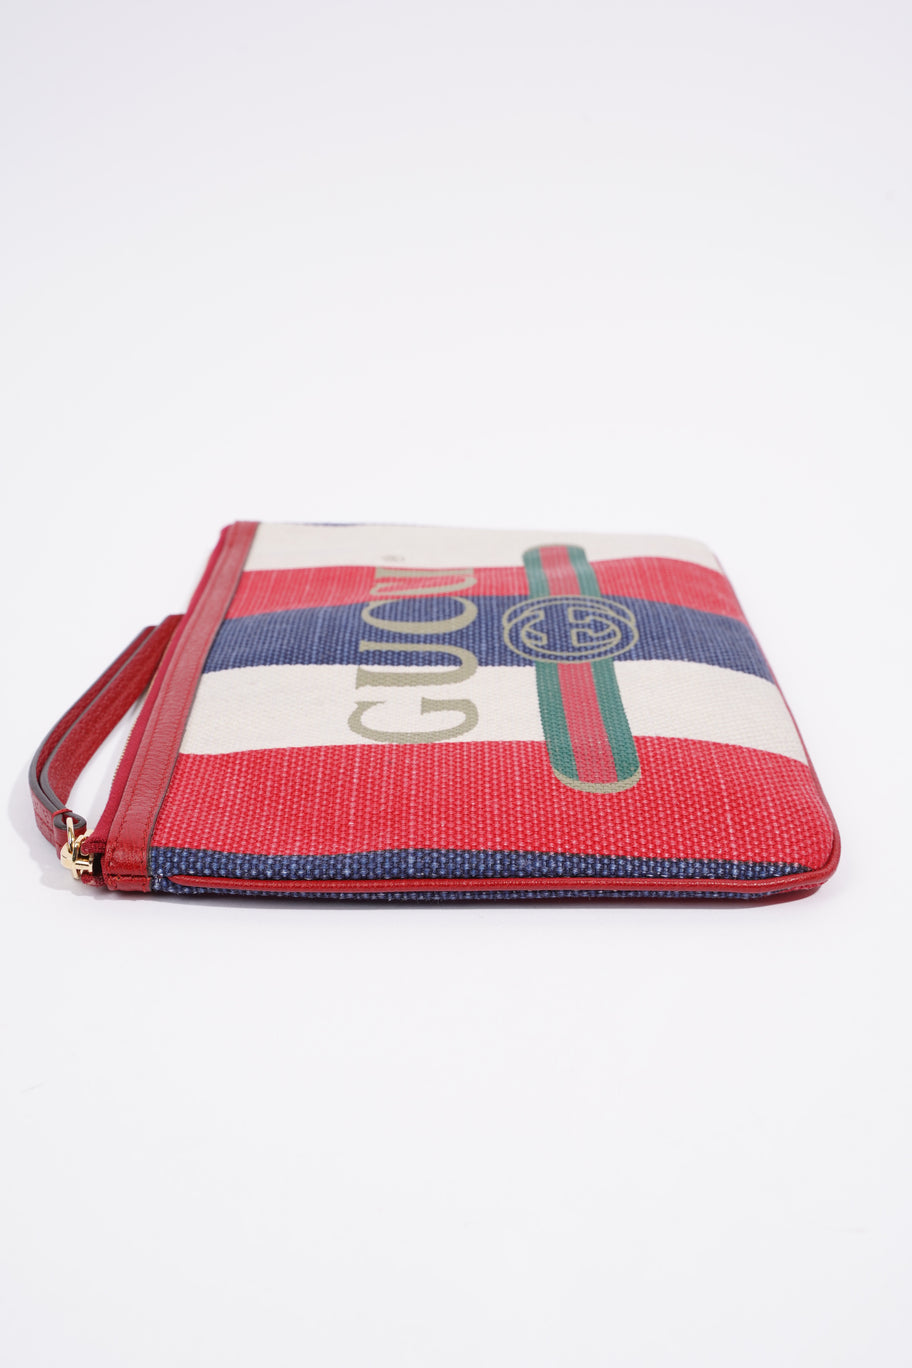 Clutch Red / White / Blue Canvas Image 5